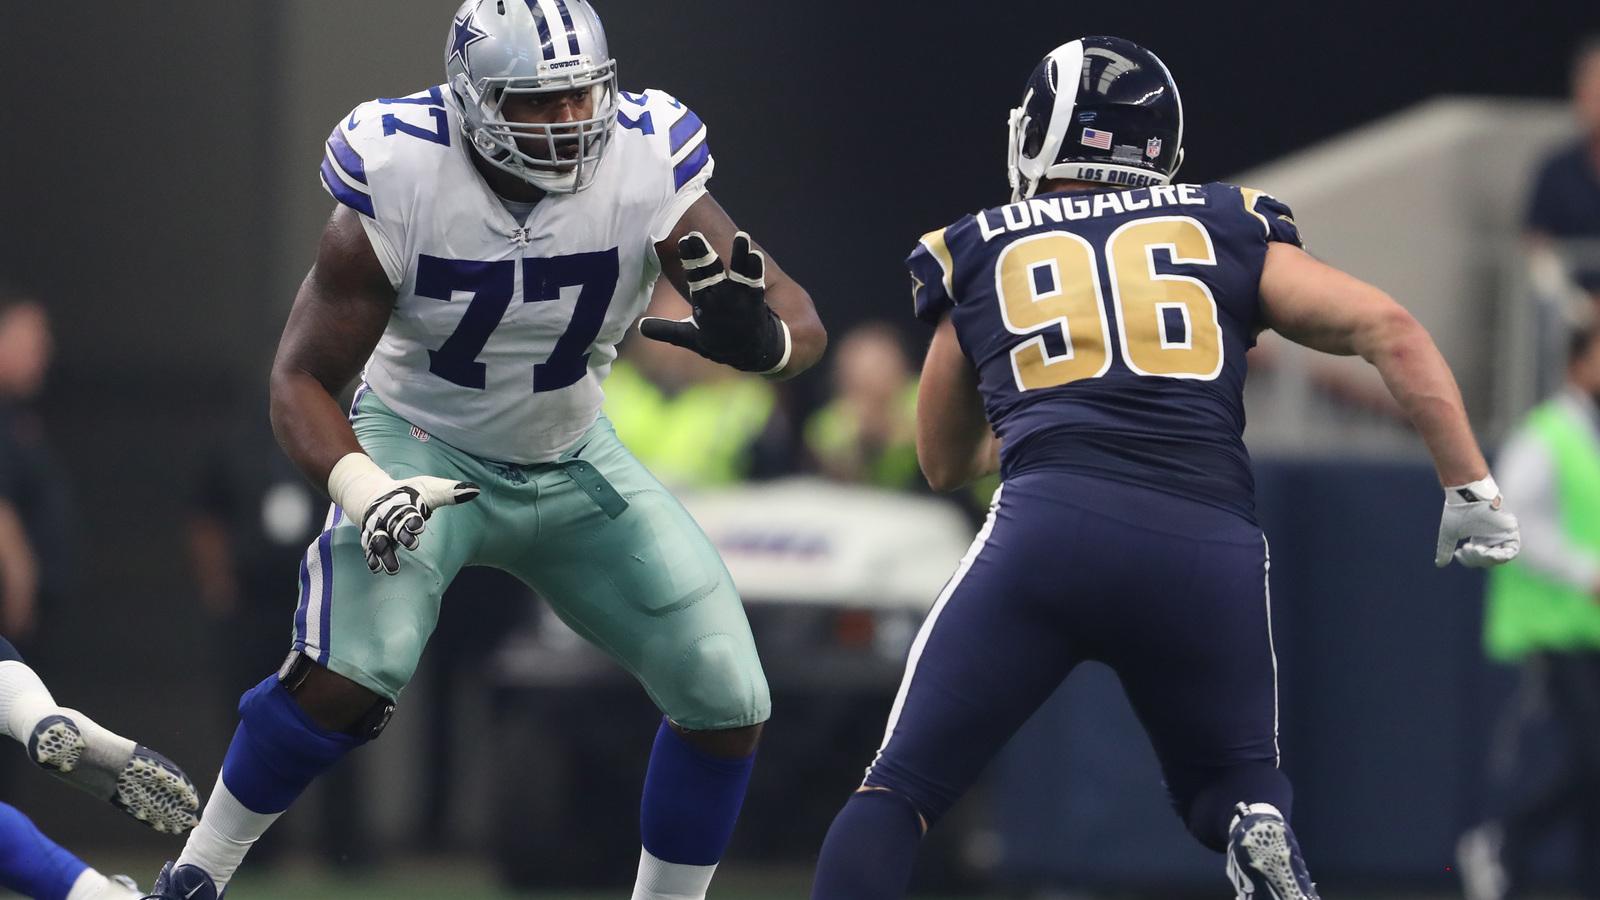 Cowboys' All Pro Tyron Smith Has Sprained LCL In Knee